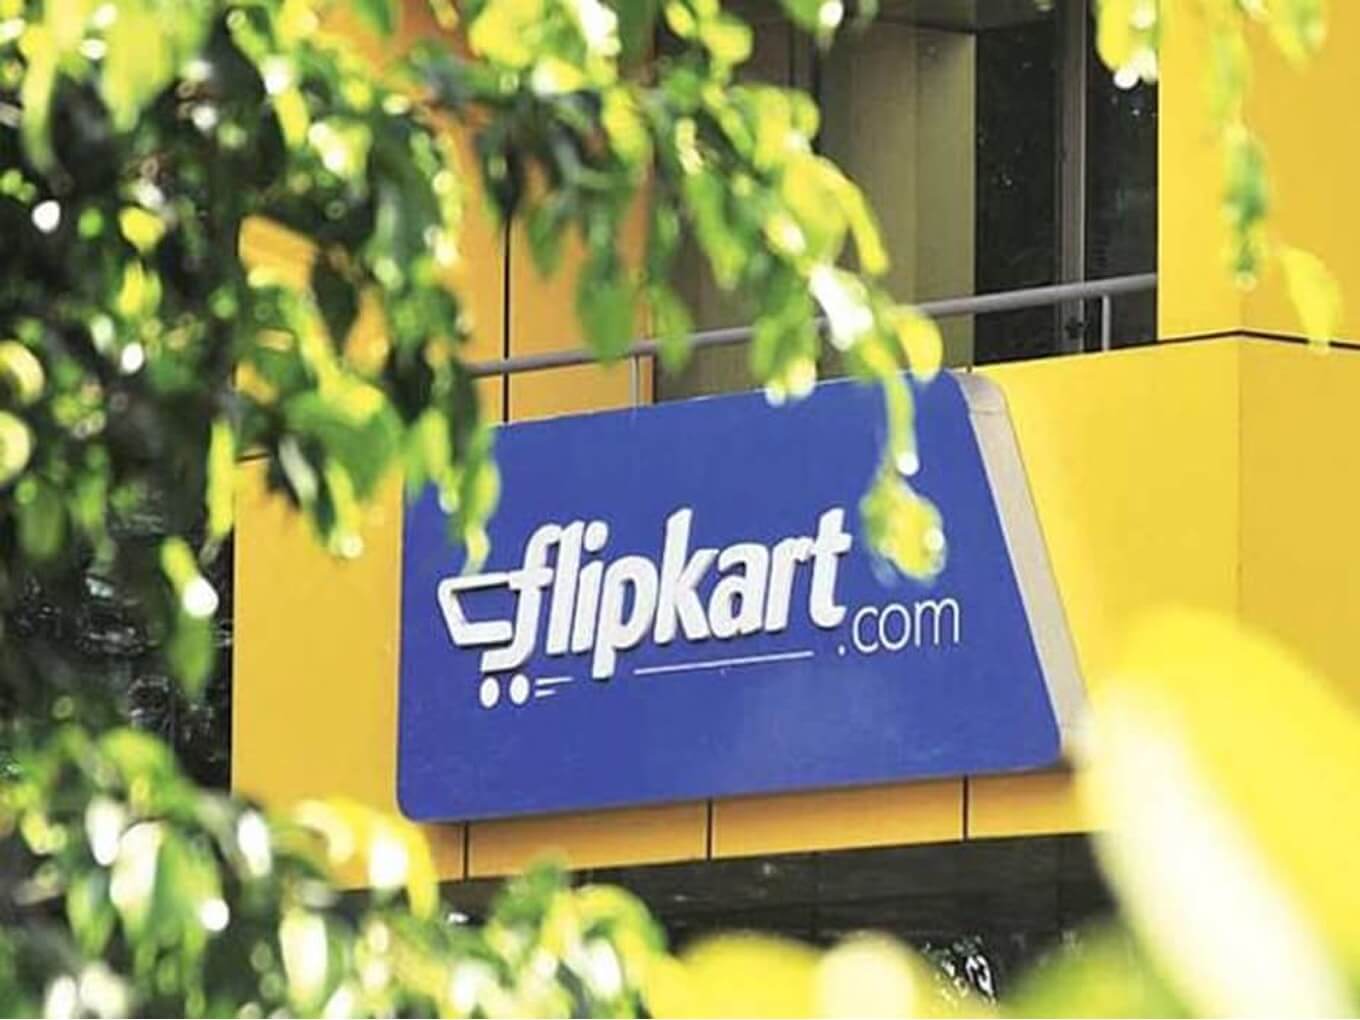 Flipkart To Capitalise On Digital Advertising To Reach $200 Mn Sales By March 2019